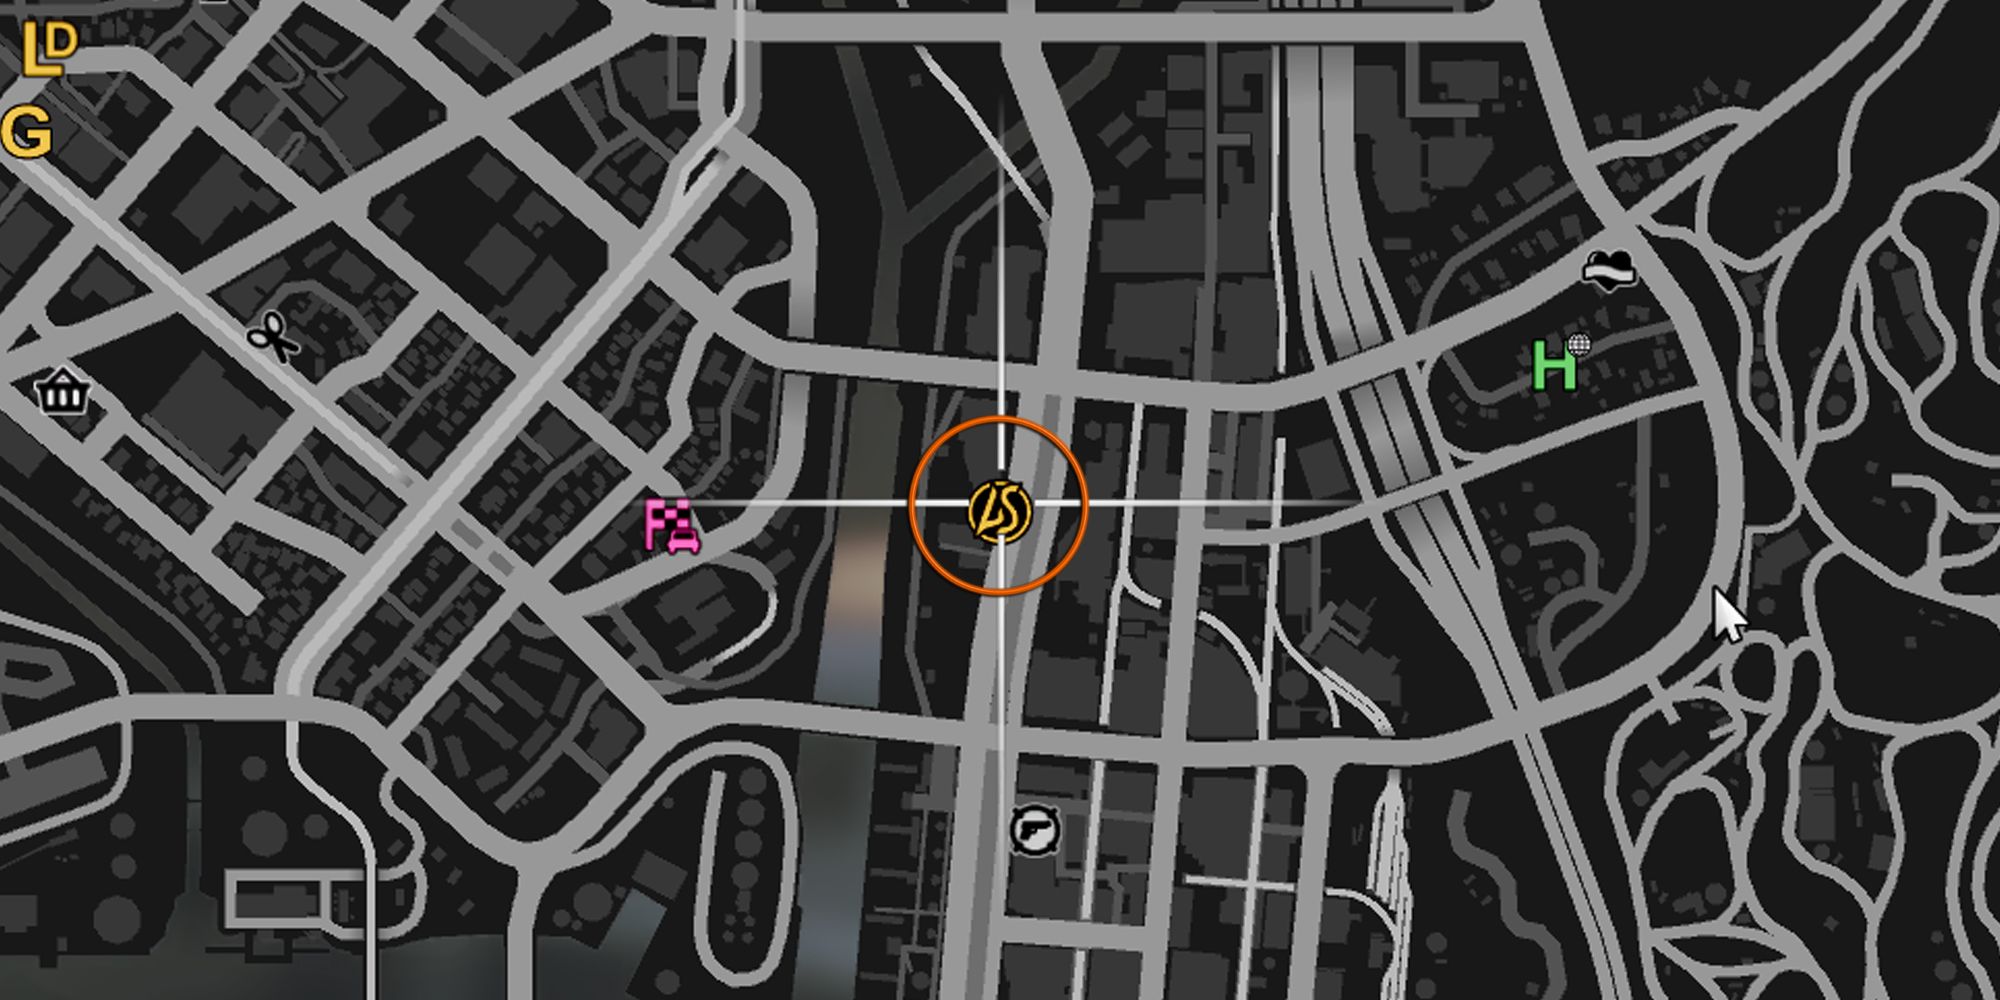 Image depicts the Grand Theft Auto Online map zoomed in to the LS Car Meet location in La Mesa. The LS Car Meet logo is in yellow, with an orange circle around it to highlight the location.